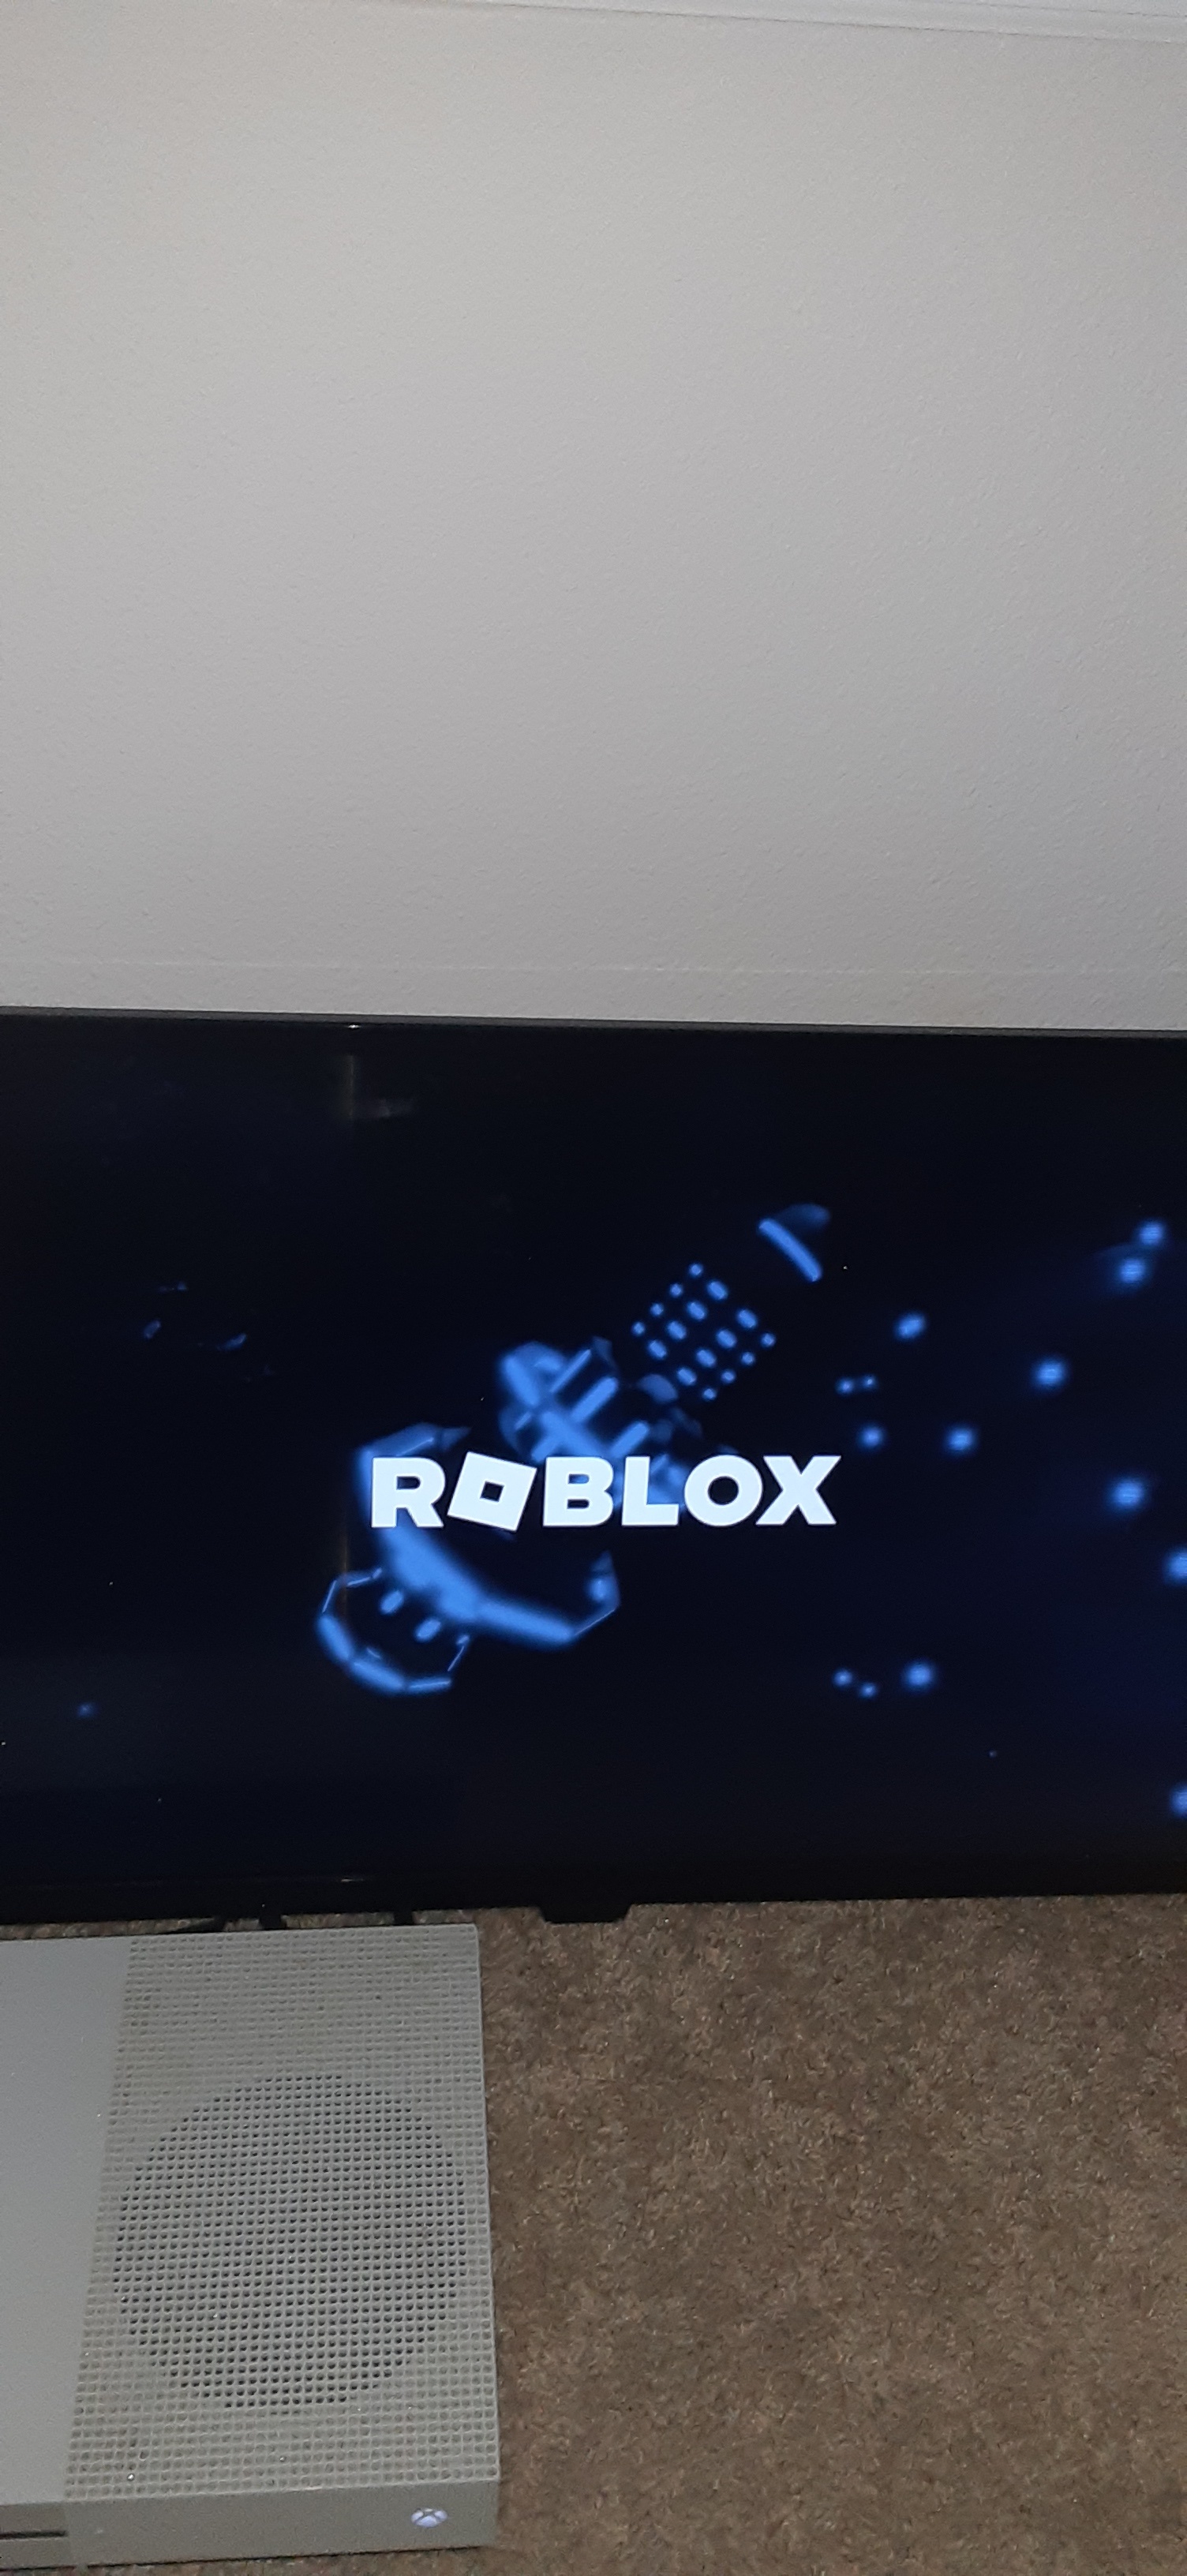 I can't play Roblox on my xbox - Microsoft Community